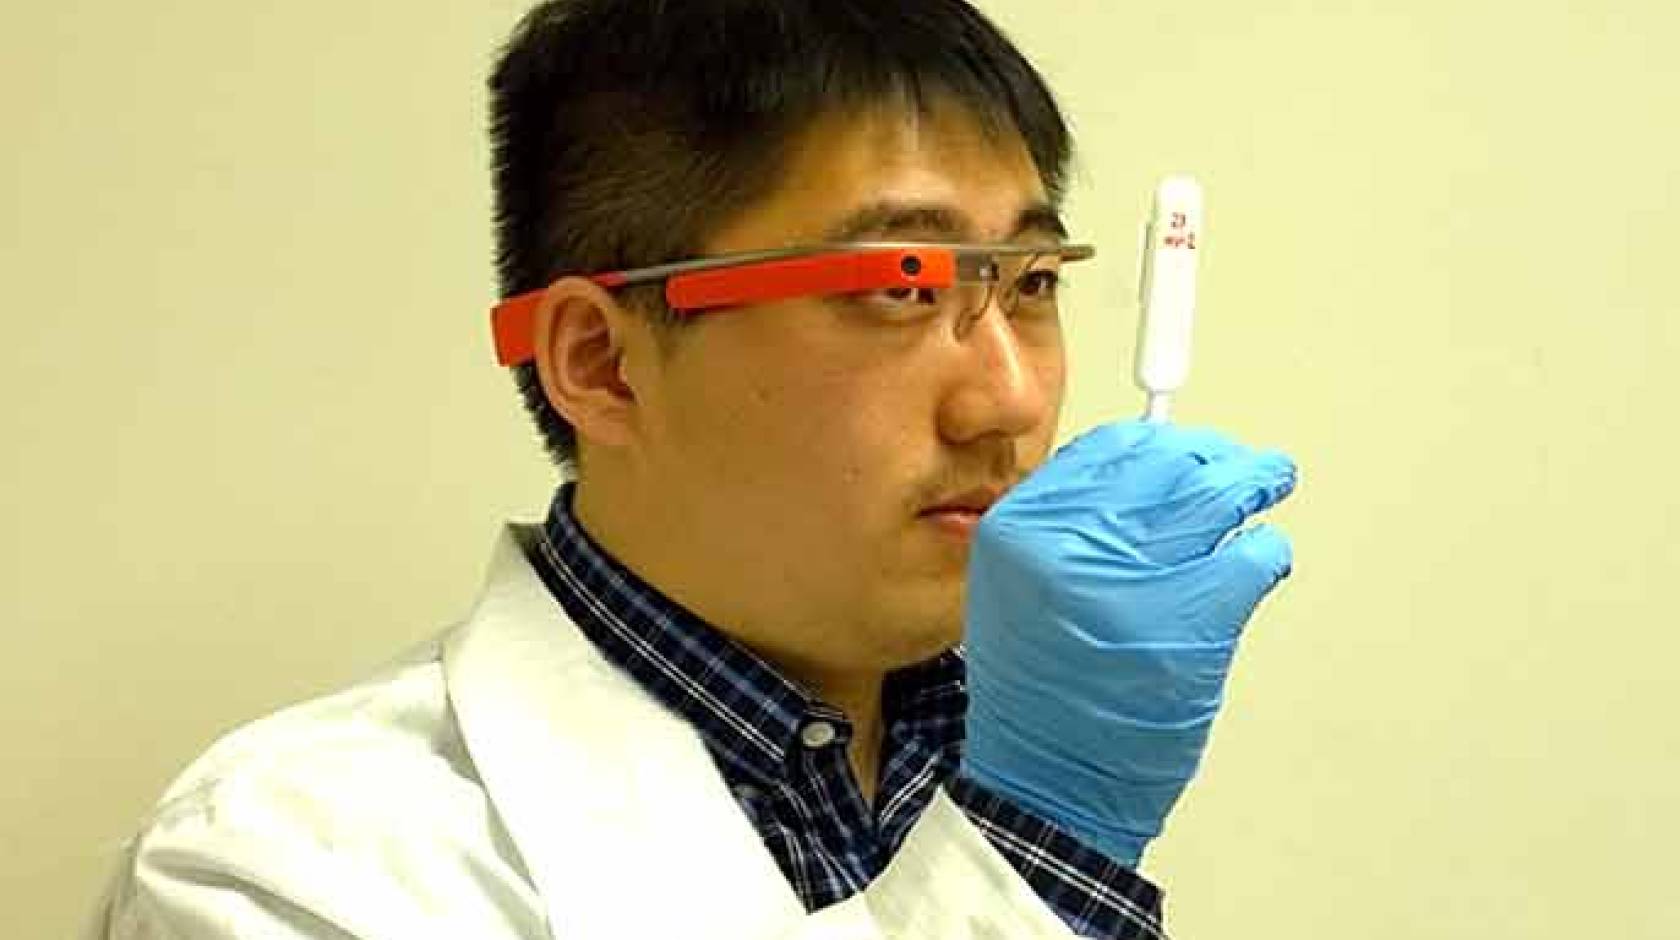 Researcher tests Google Glass